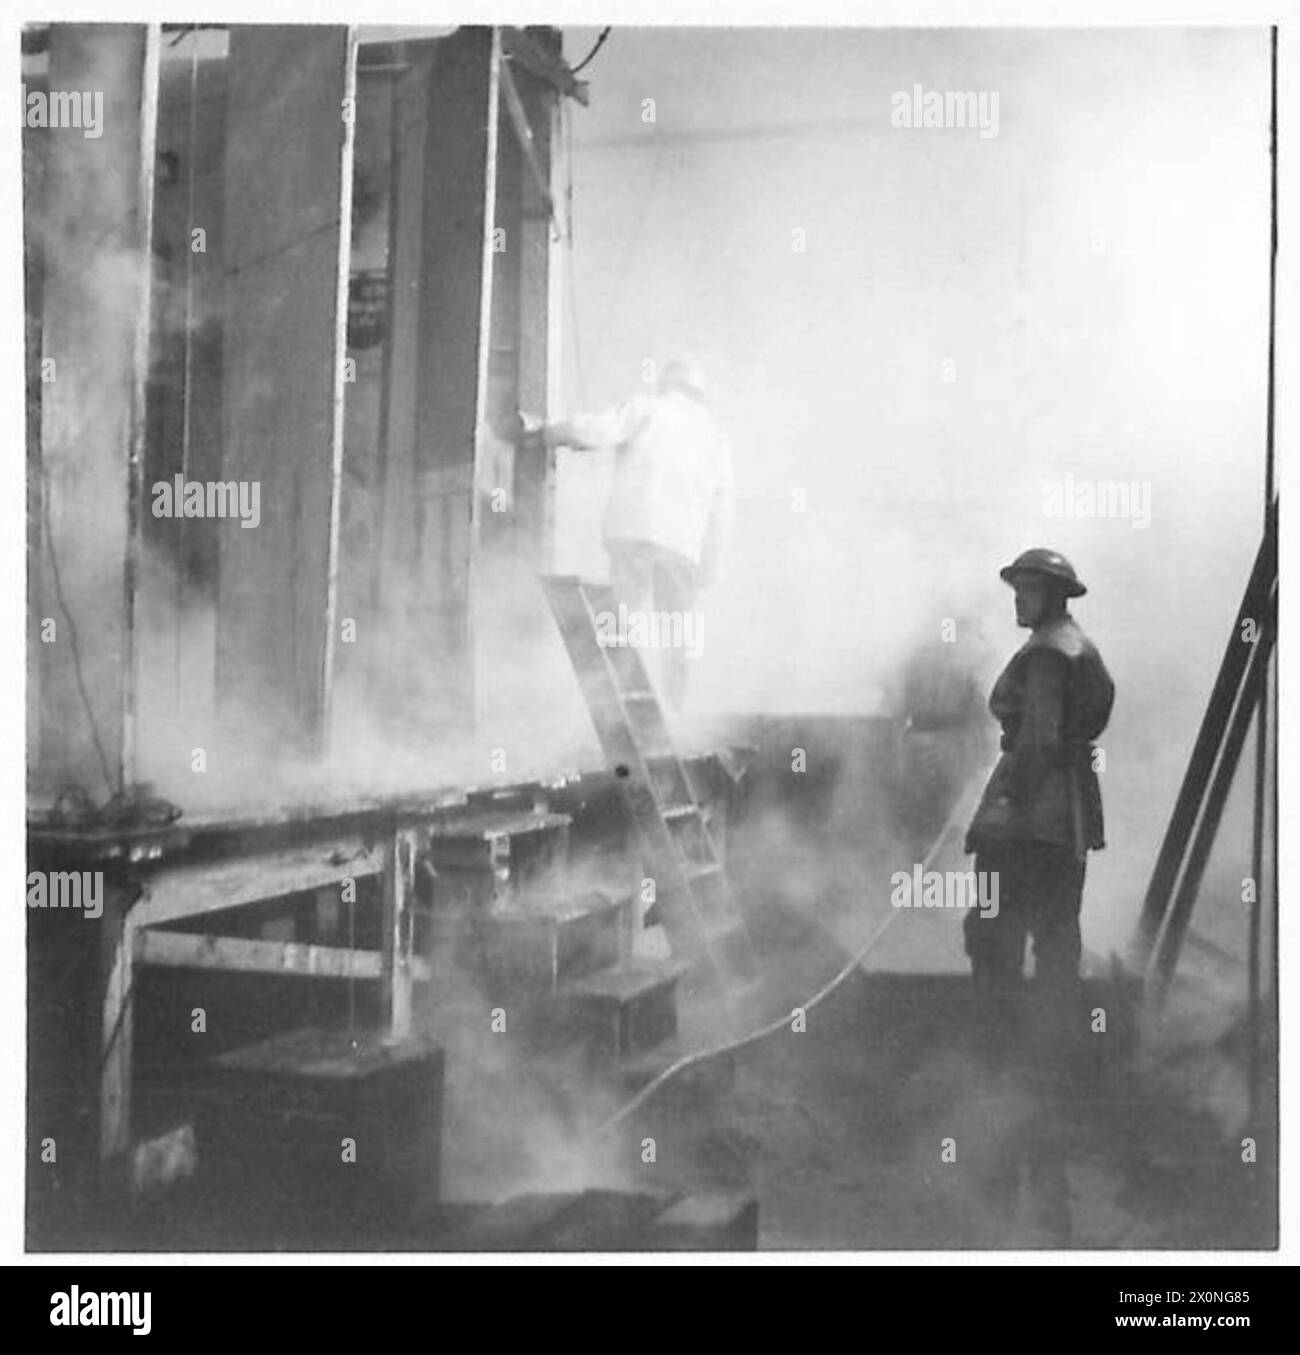 THE BRITISH ARMY IN NORTH AFRICA, SICILY, ITALY, THE BALKANS AND AUSTRIA 1942-1946 - When fire broke out in the concert hall of 5 Corps Workshops on Boxing Day, many weeks of hard work were destroyed in a few minutes. The Unit had intended to put on the pantomime 'Aladdin'. Photographic negative , British Army Stock Photo